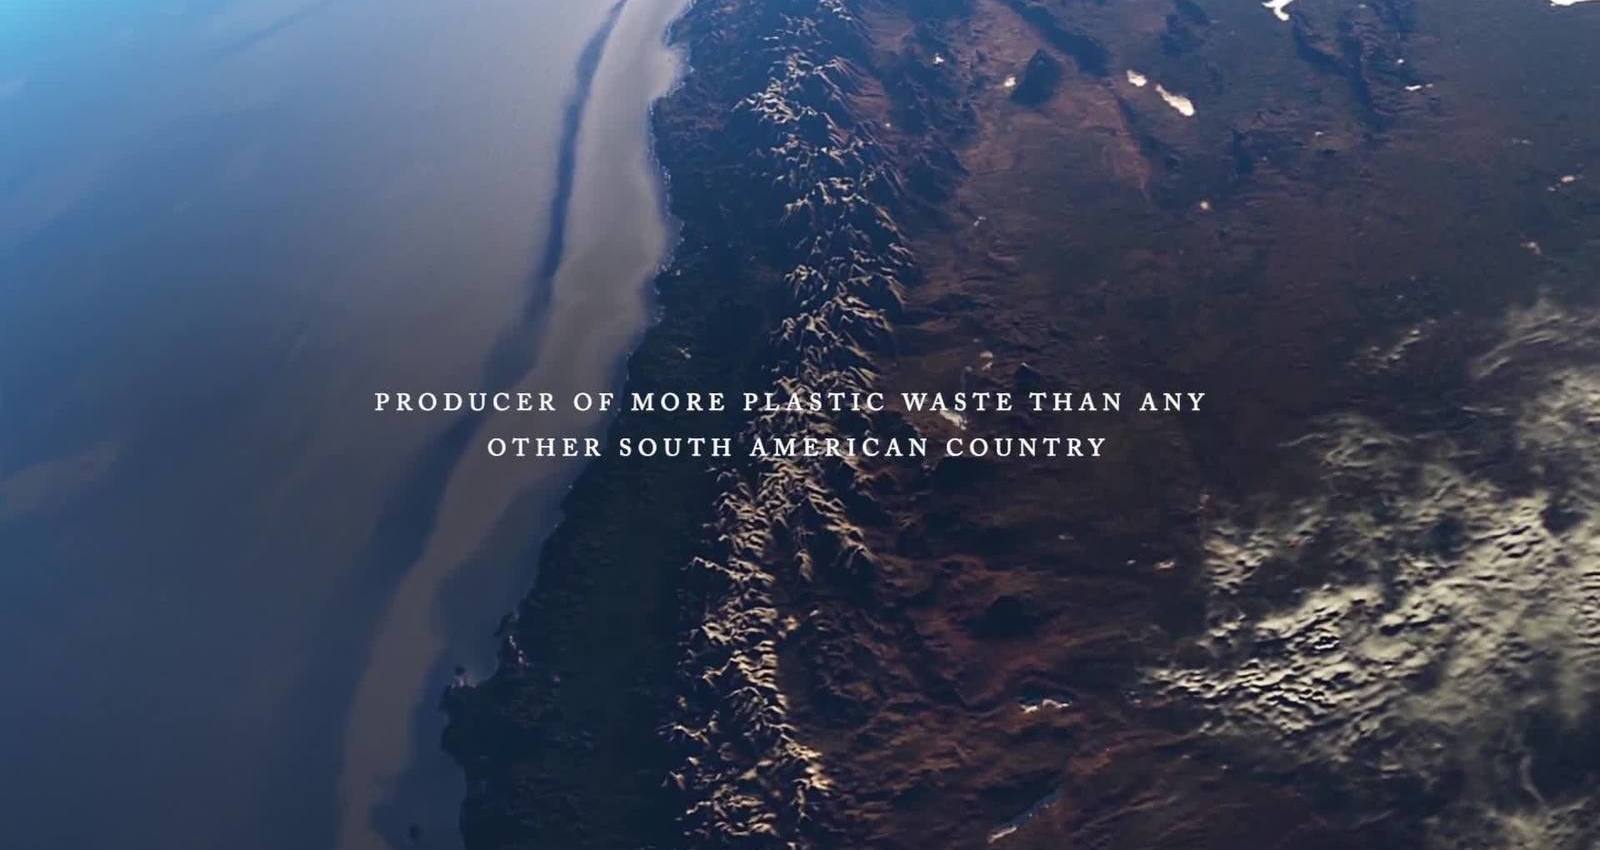 The Nature of Plastic